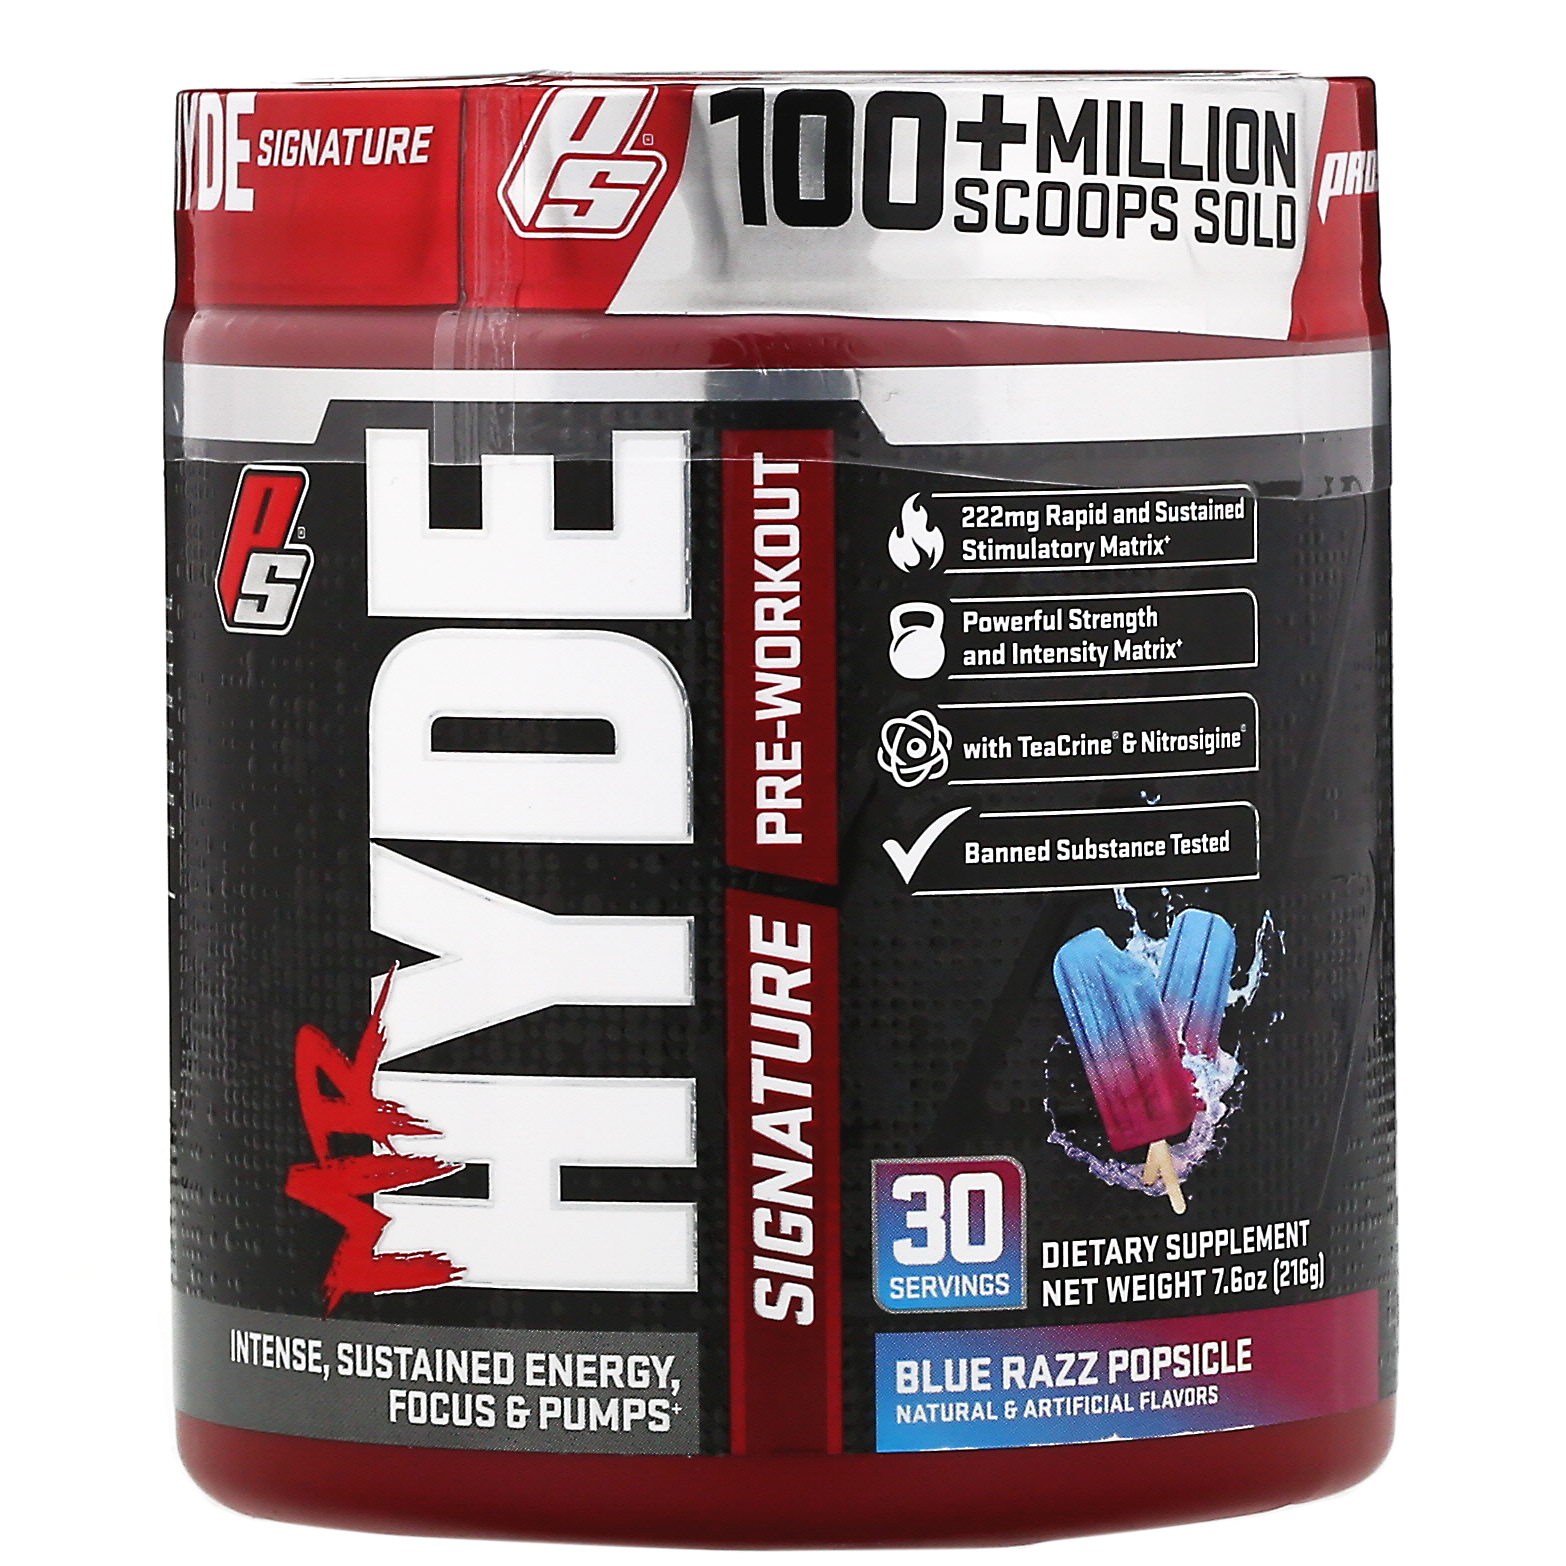 15 Minute The hyde pre workout for Gym